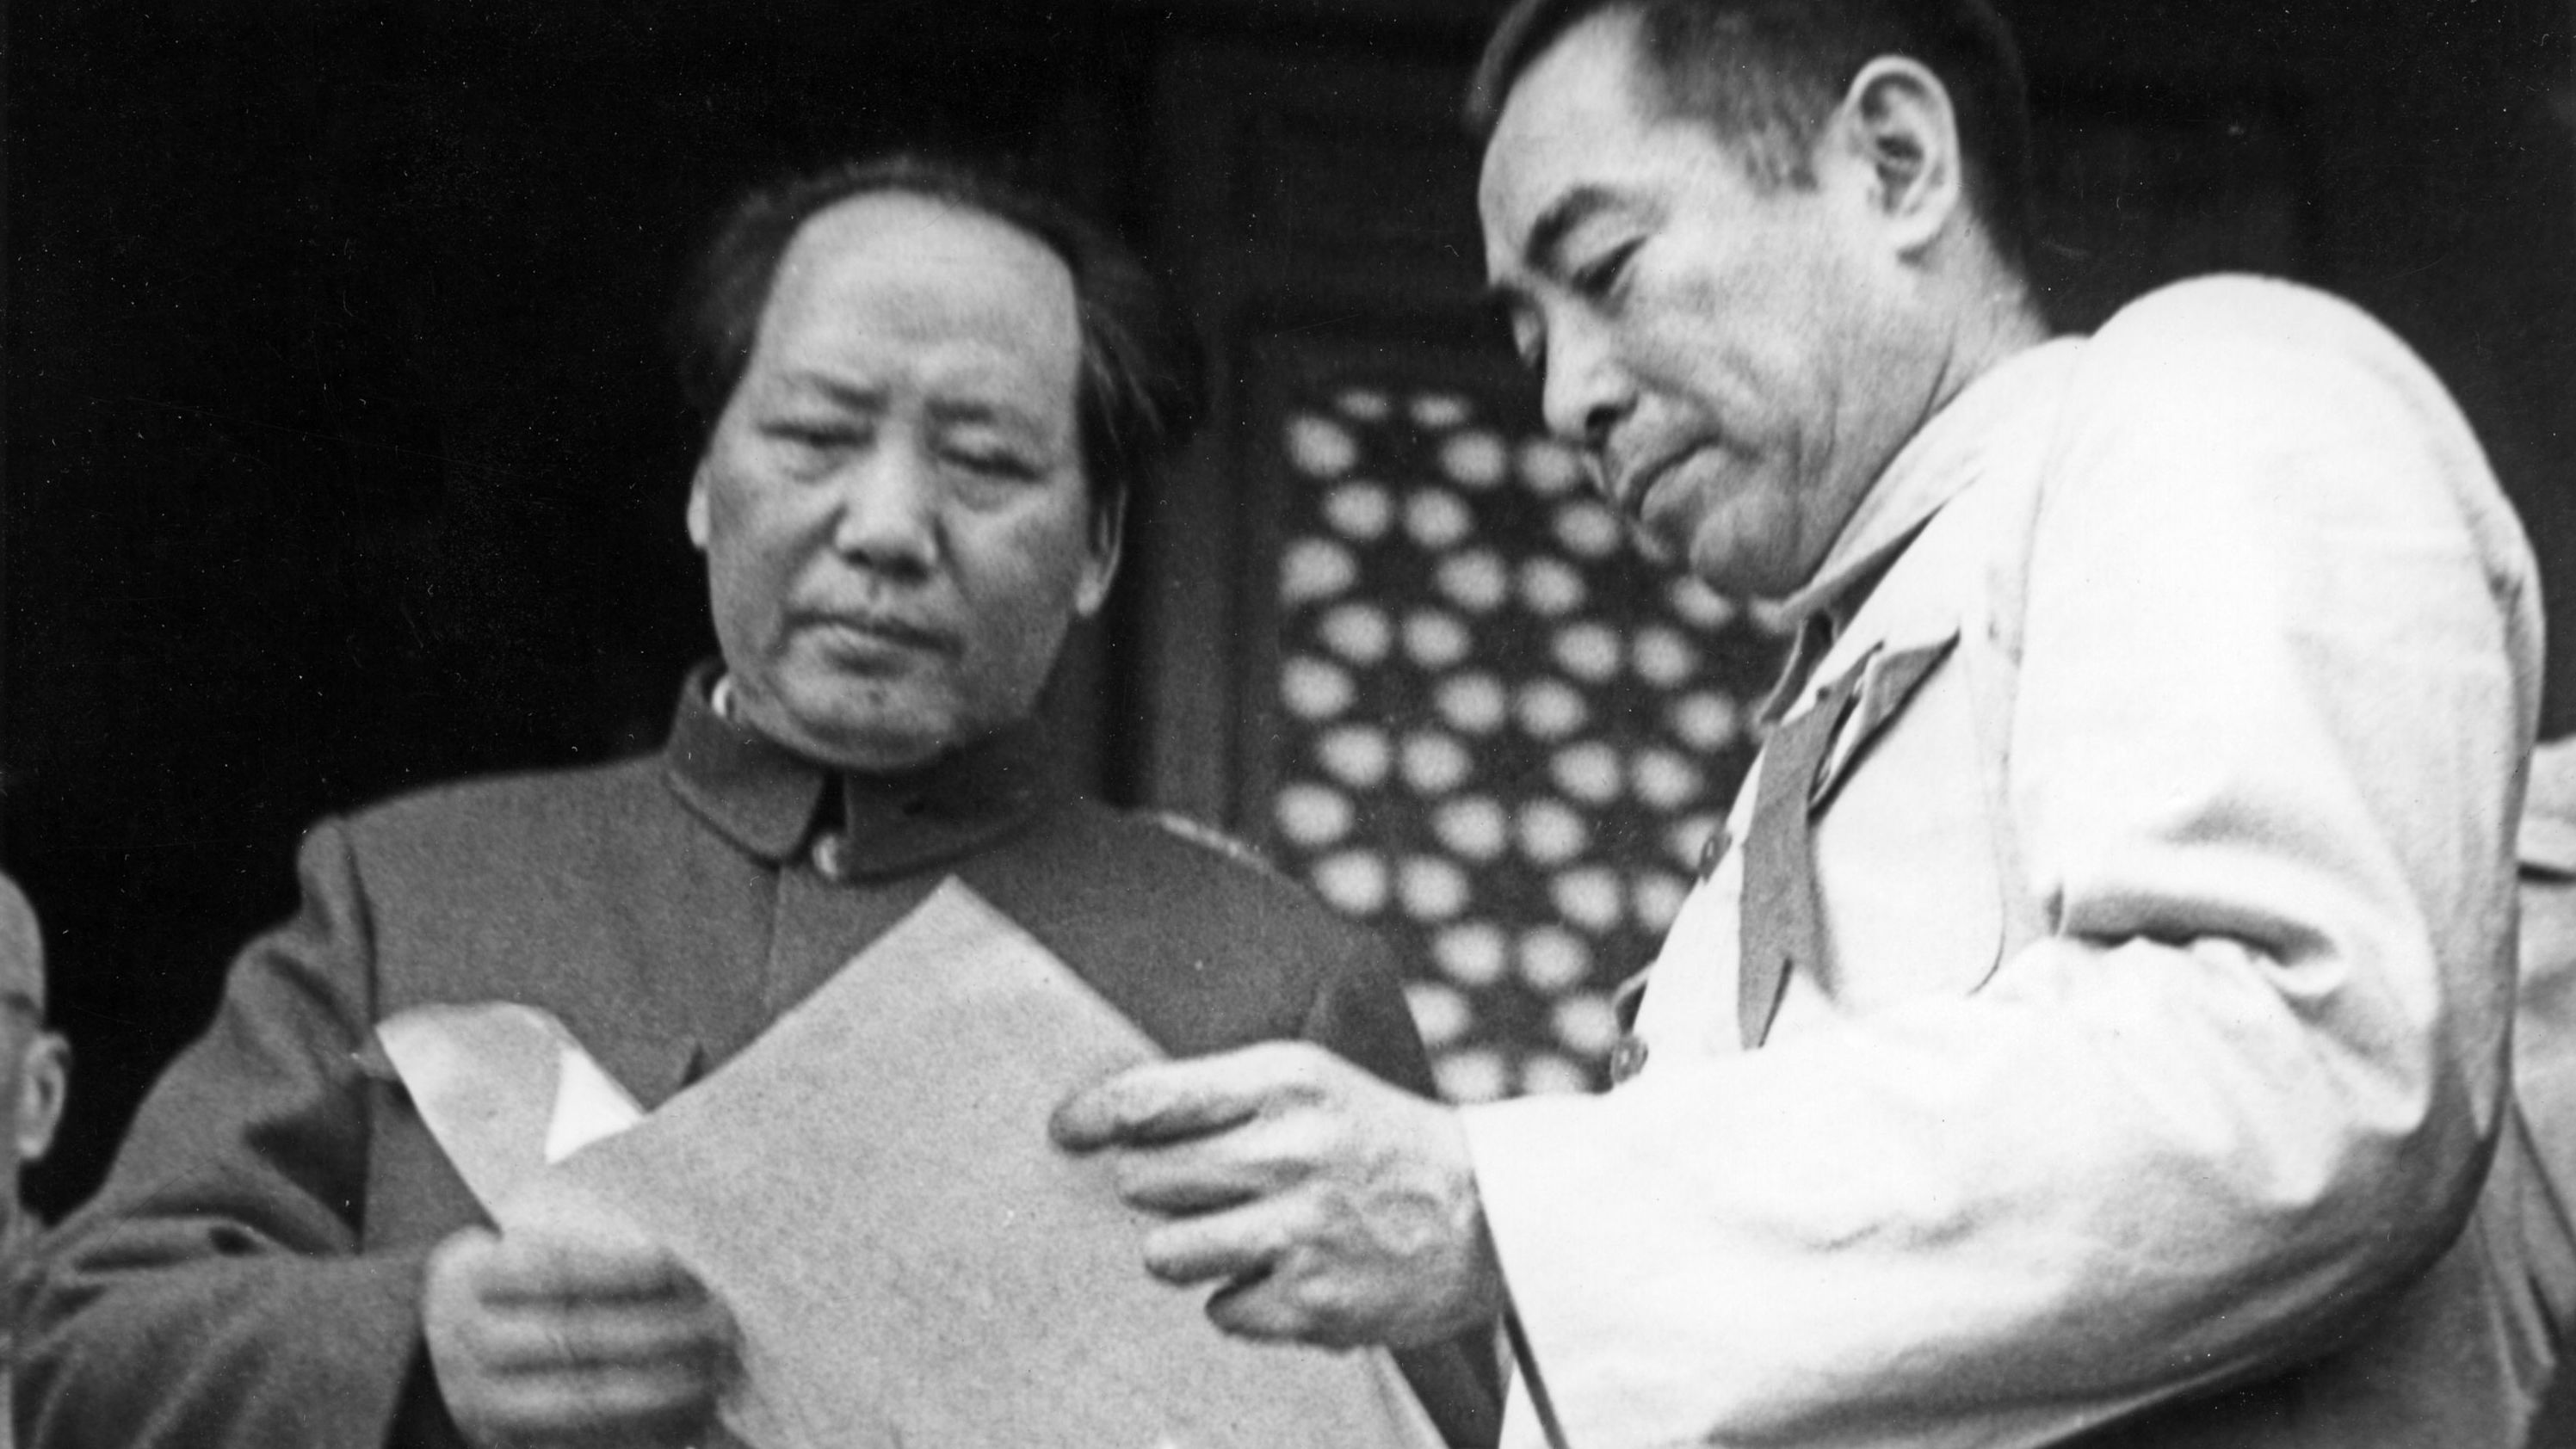 Mao, left, and Zhou Enlai attend the founding ceremony of the People's Republic of China in October 1949, after the Communists defeated the Nationalists in the civil war. Mao named himself head of state and Zhou became premier.<br /><br />The defeated Nationalists, led by Chiang Kai-shek, fled to the island of Taiwan.